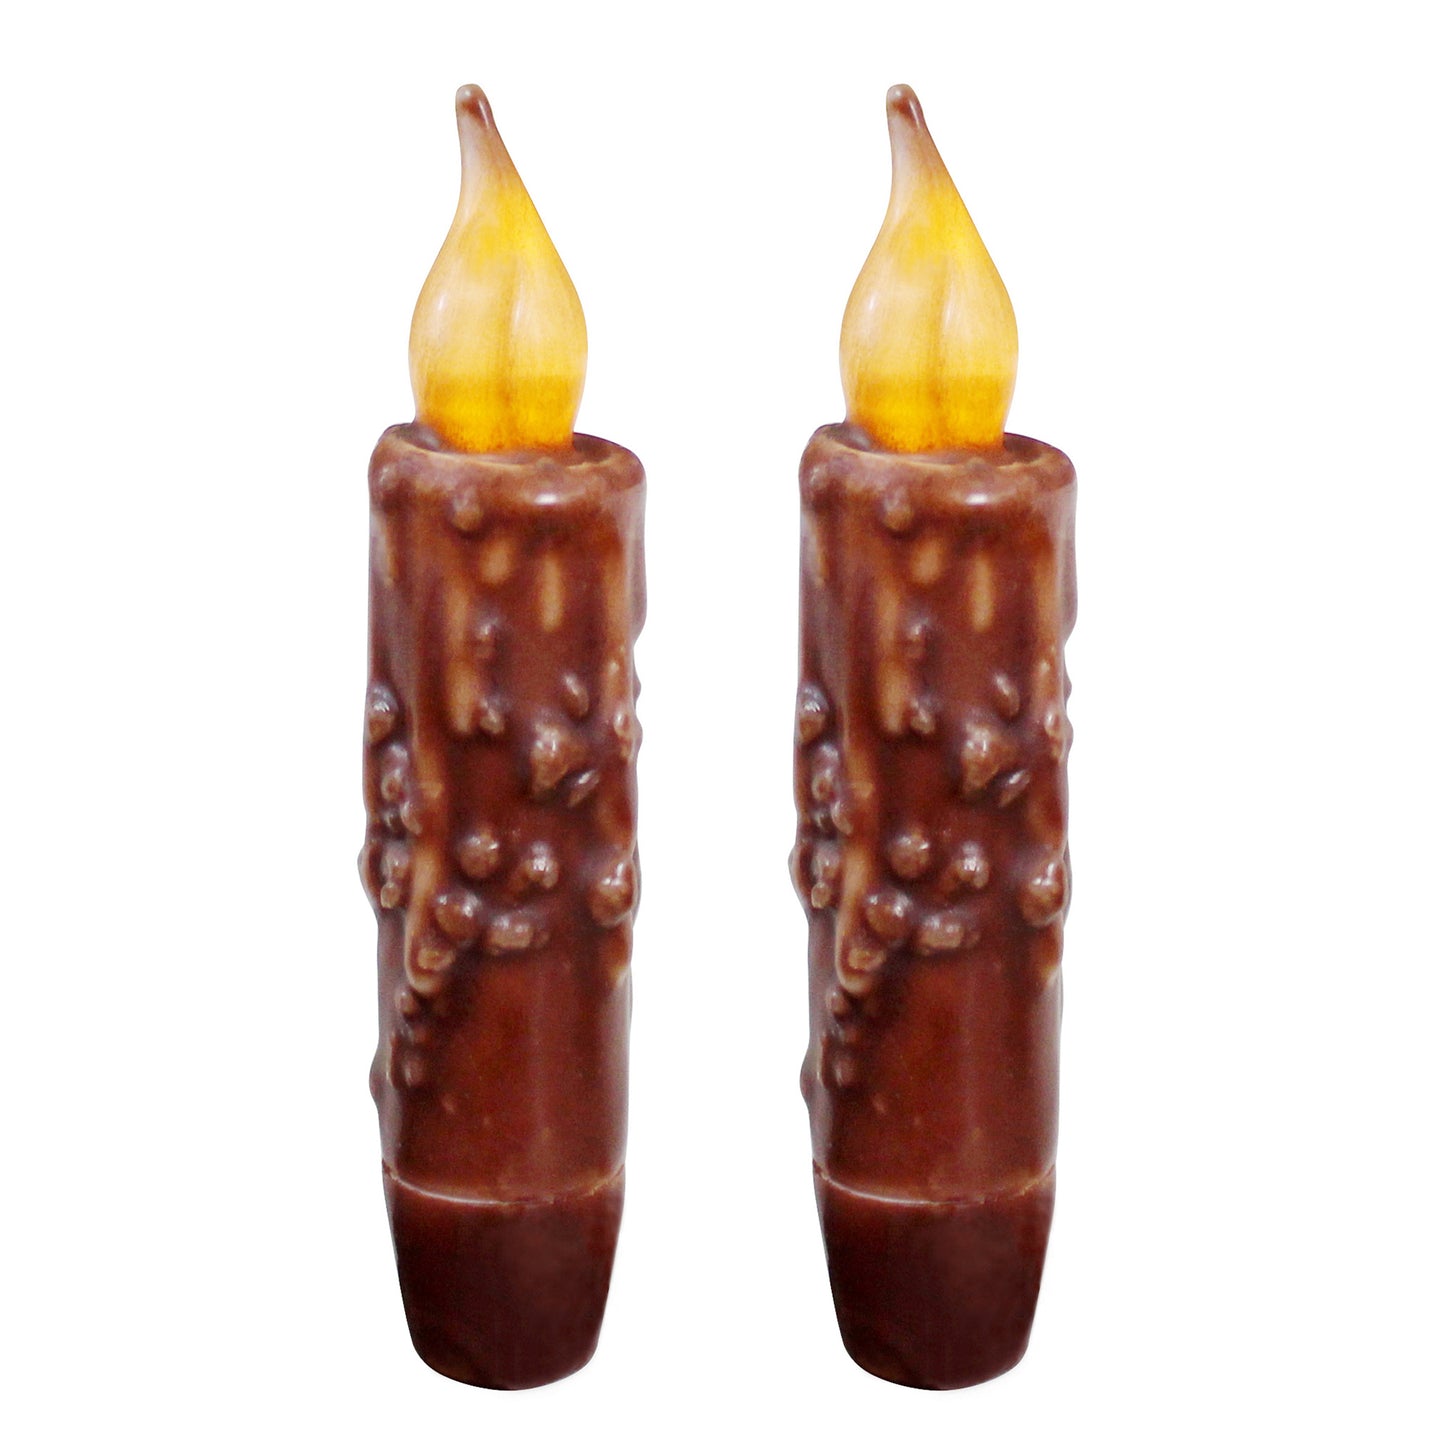 CVHOMEDECO. Real Wax Hand Dipped Battery Operated LED Timer Taper Candles Country Primitive Flameless Lights Décor, 4.75 Inch, Coffee, 2 PCS in a Package